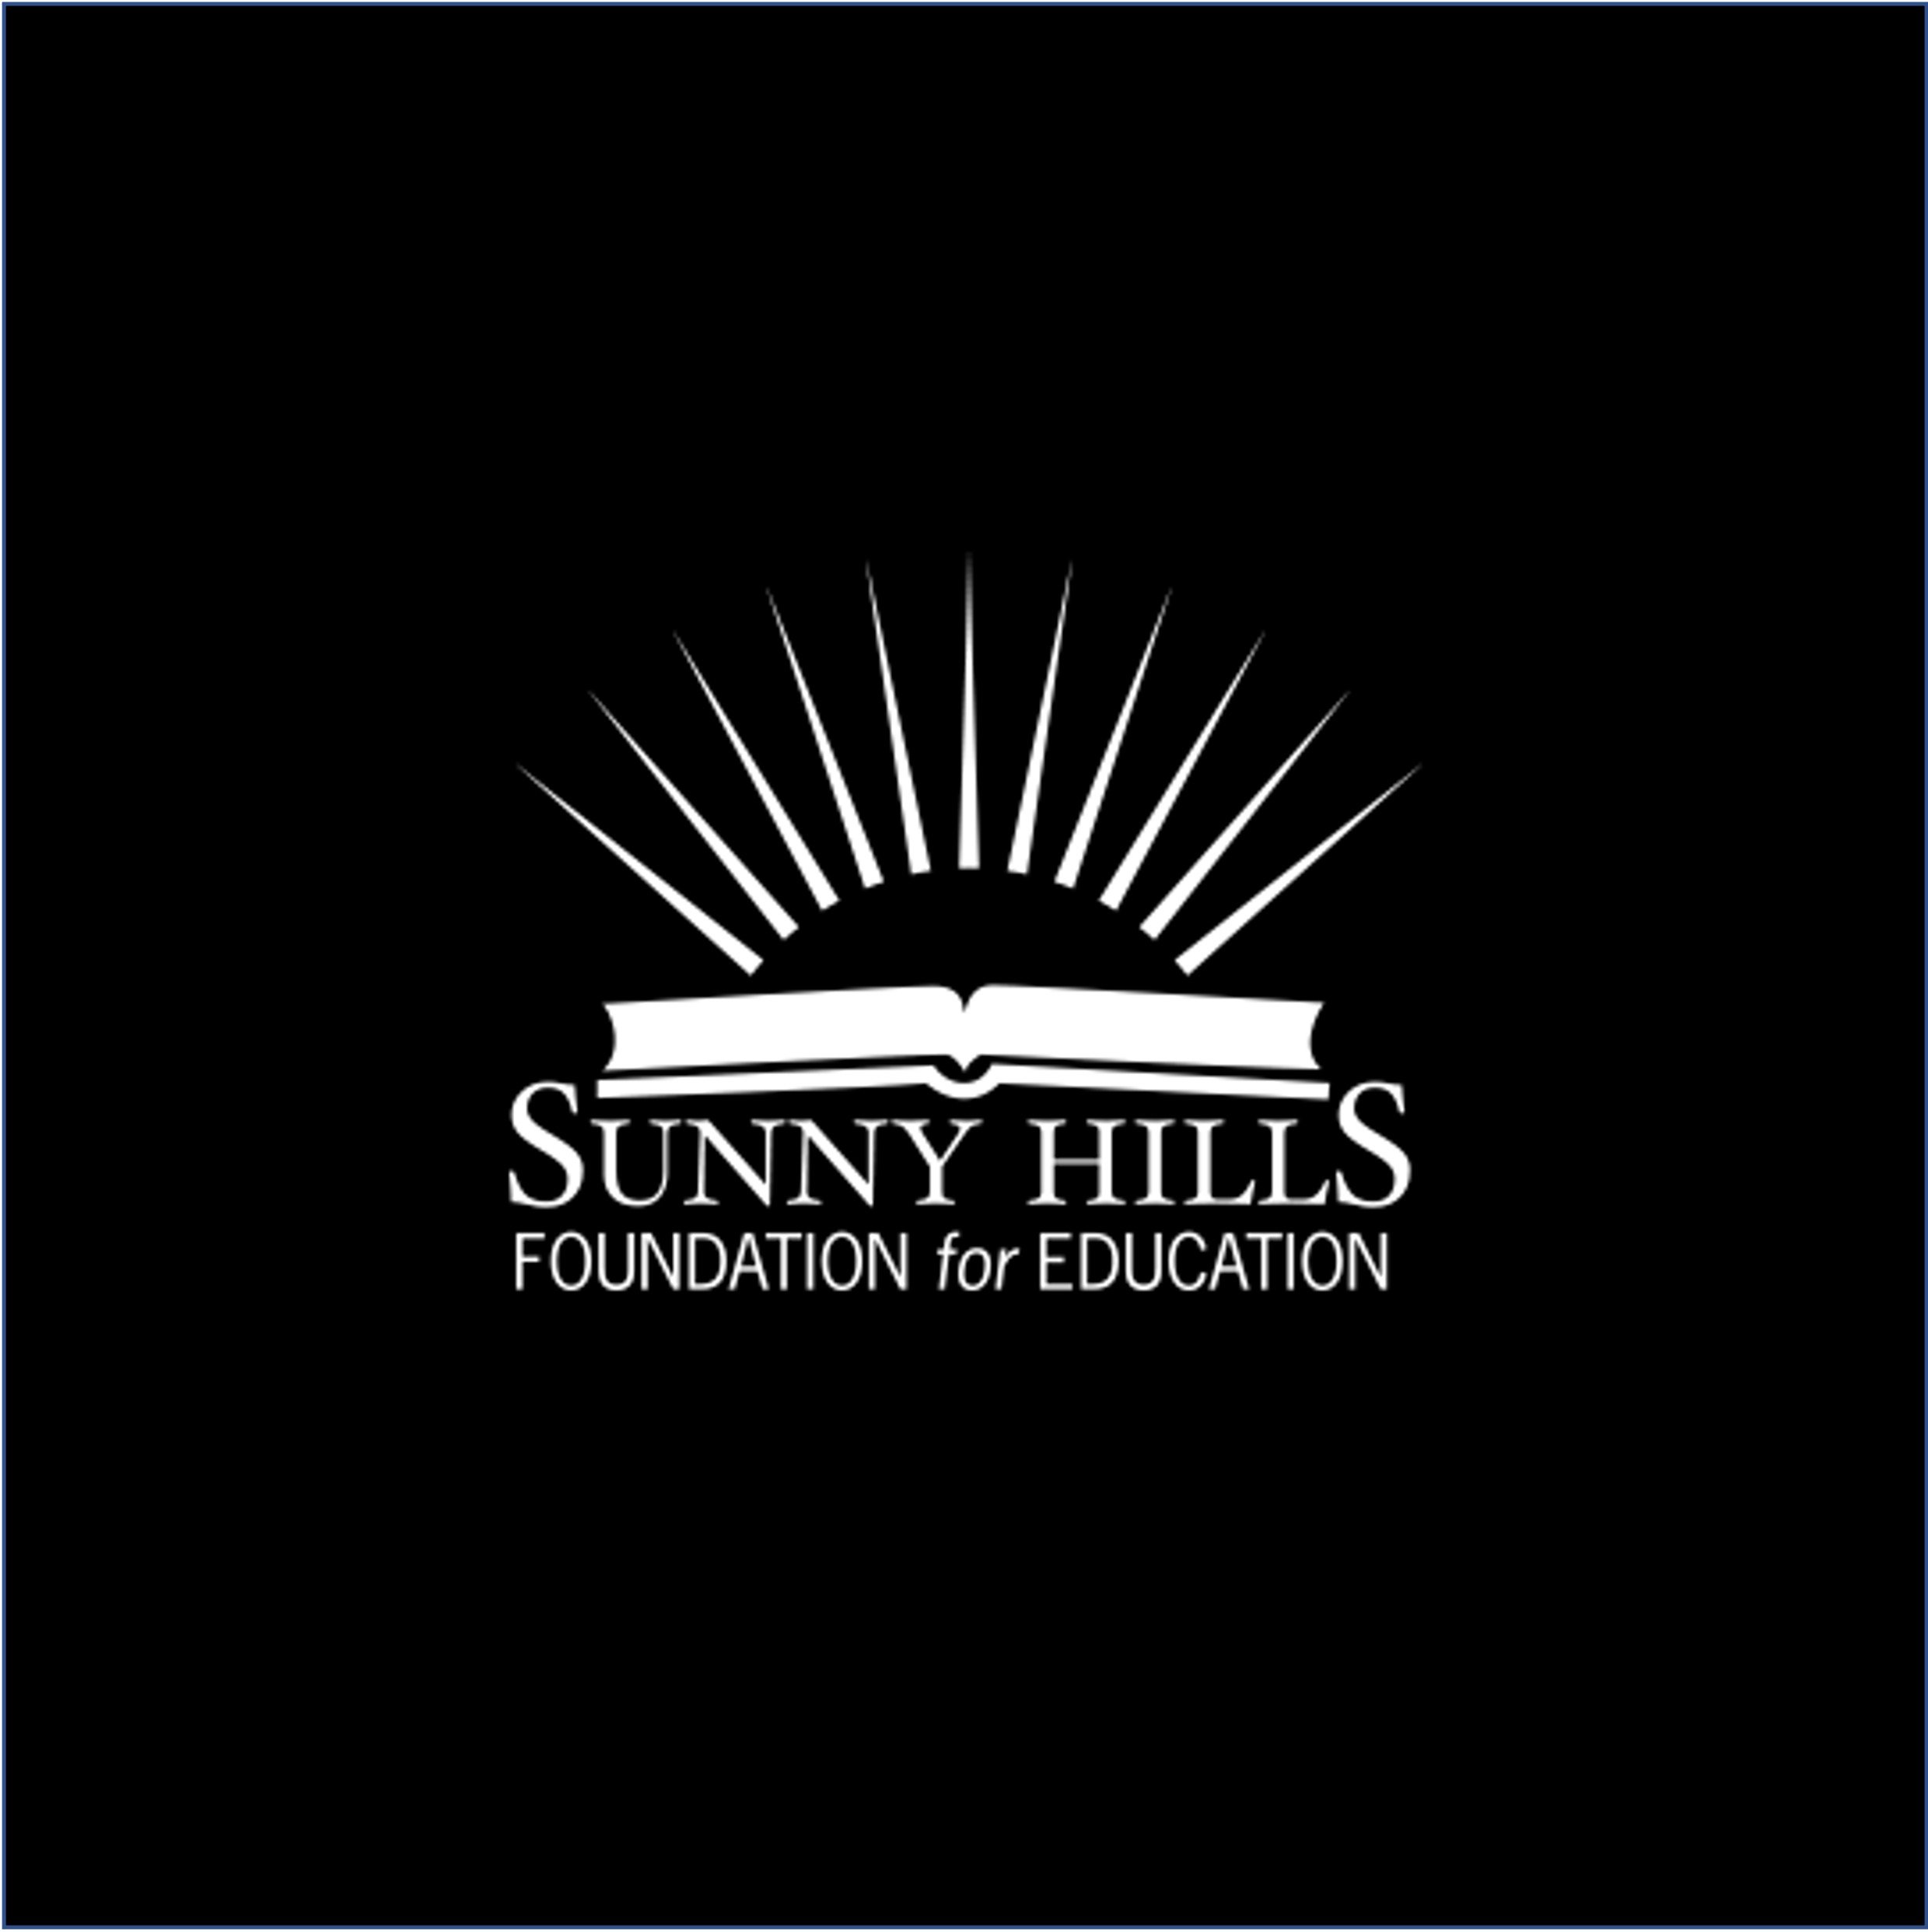 Sunny Hills Foundation for Education